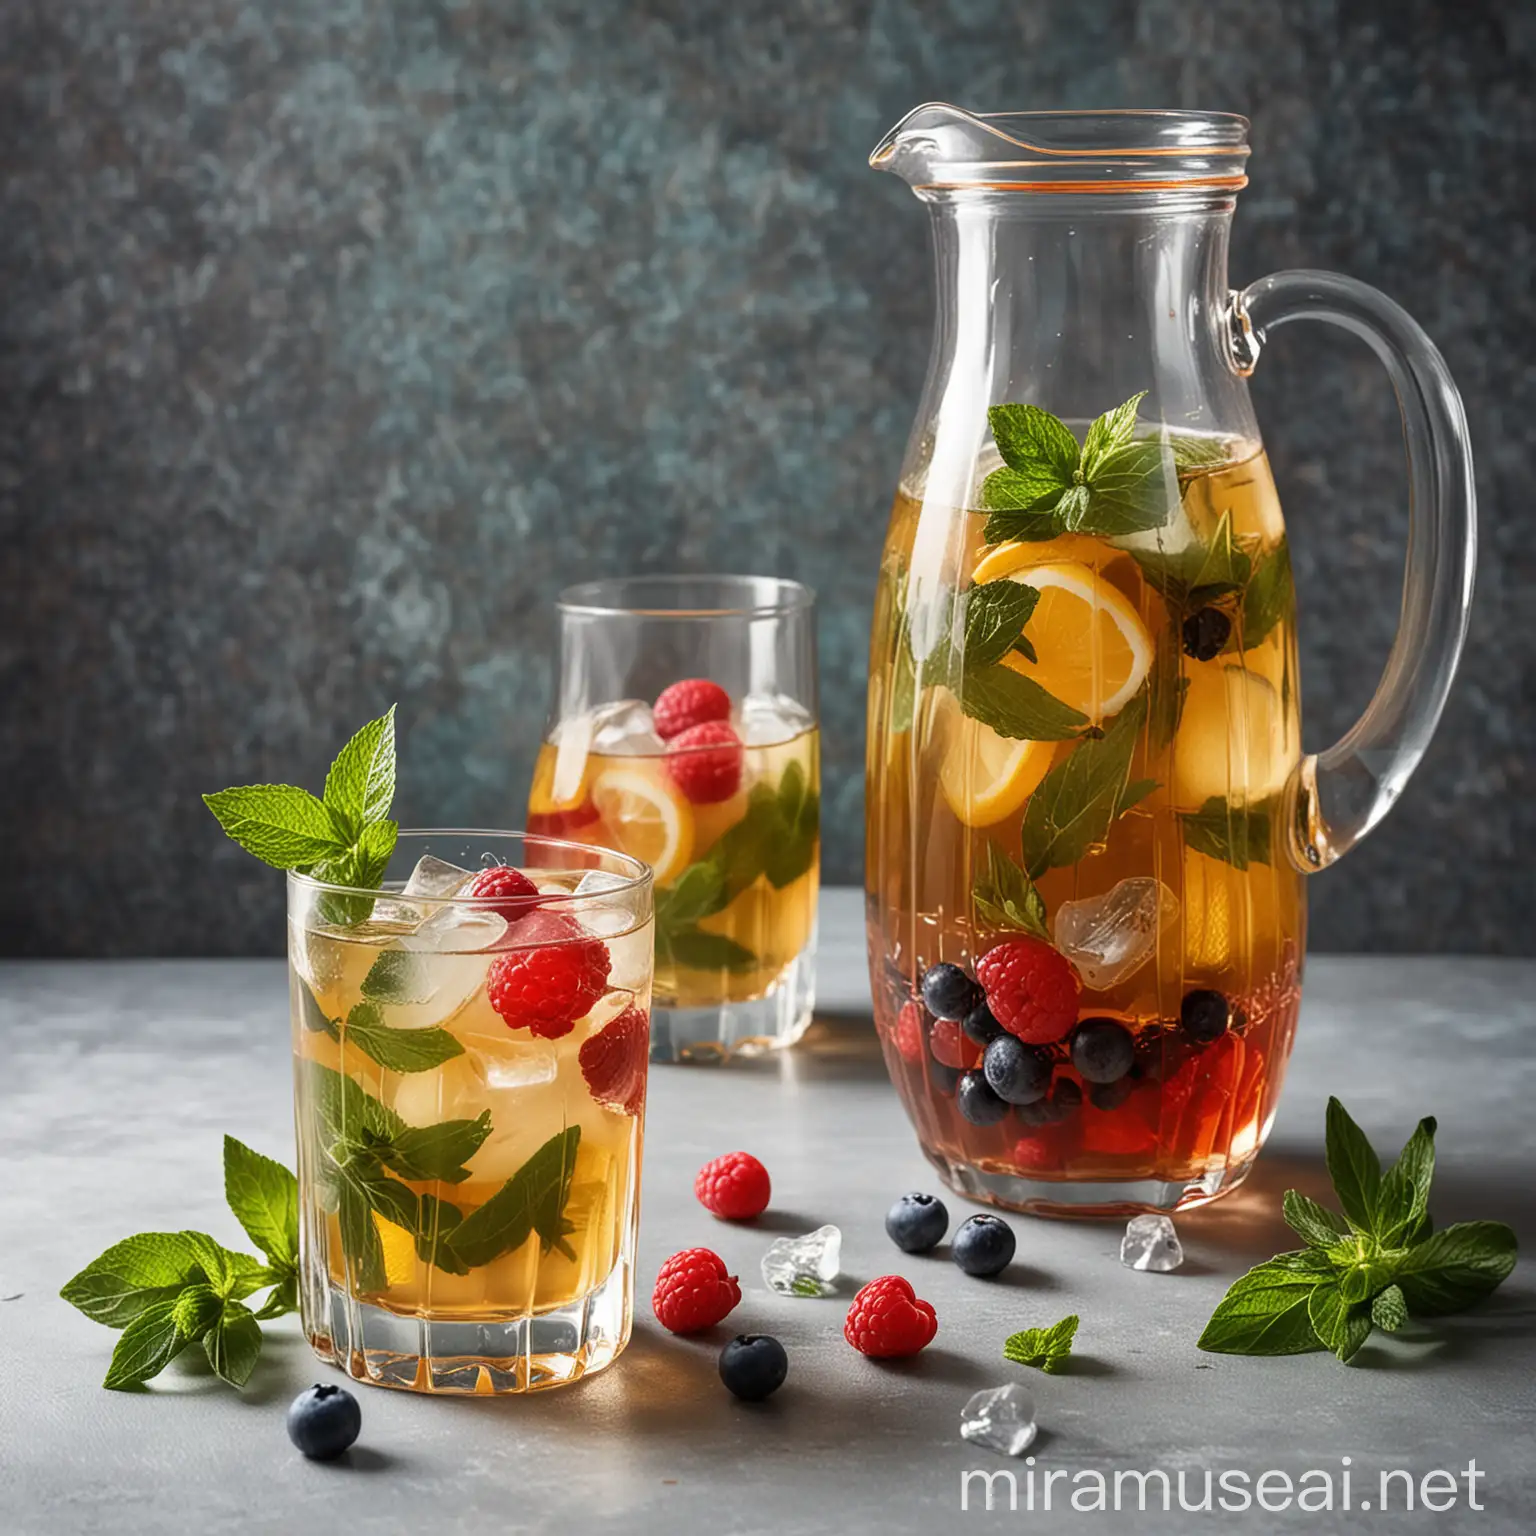 Refreshing Summer Iced Tea with Mint Leaves and Berries